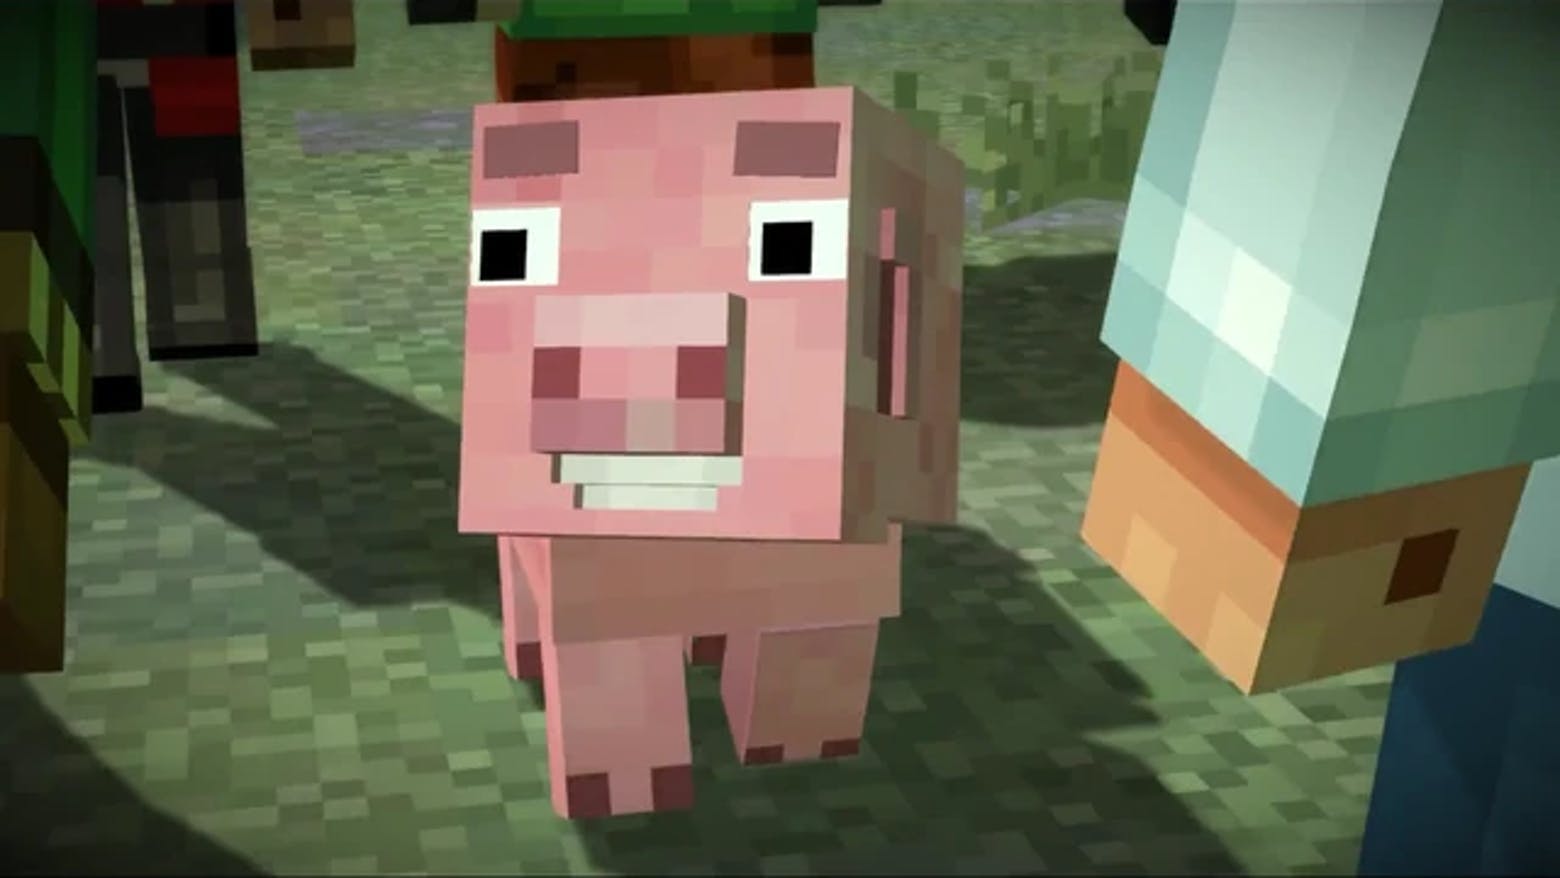 A Minecraft pig character